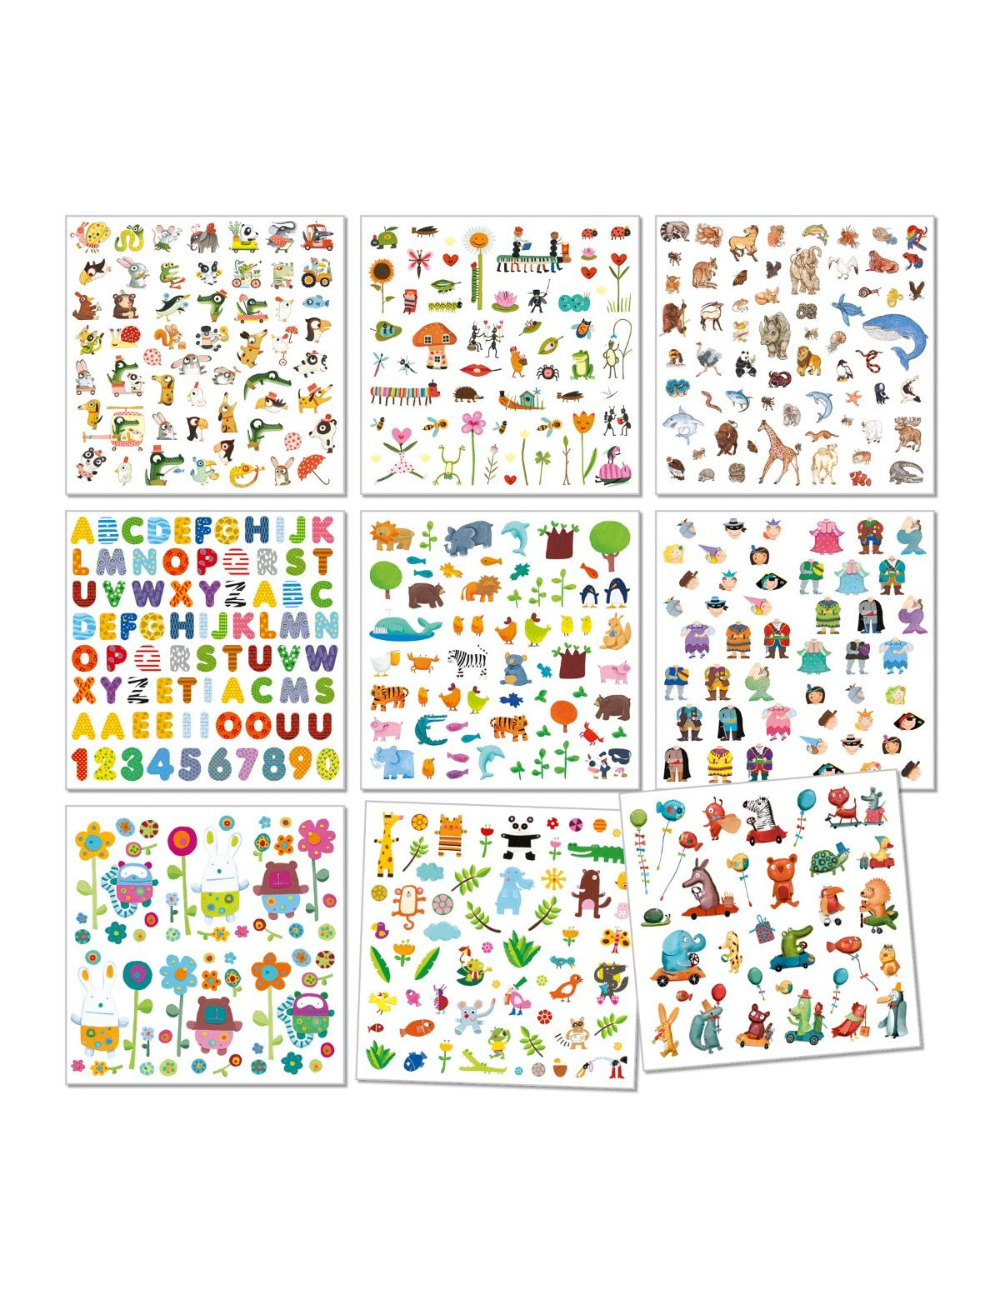 Djeco 1000 Stickers for Little Ones